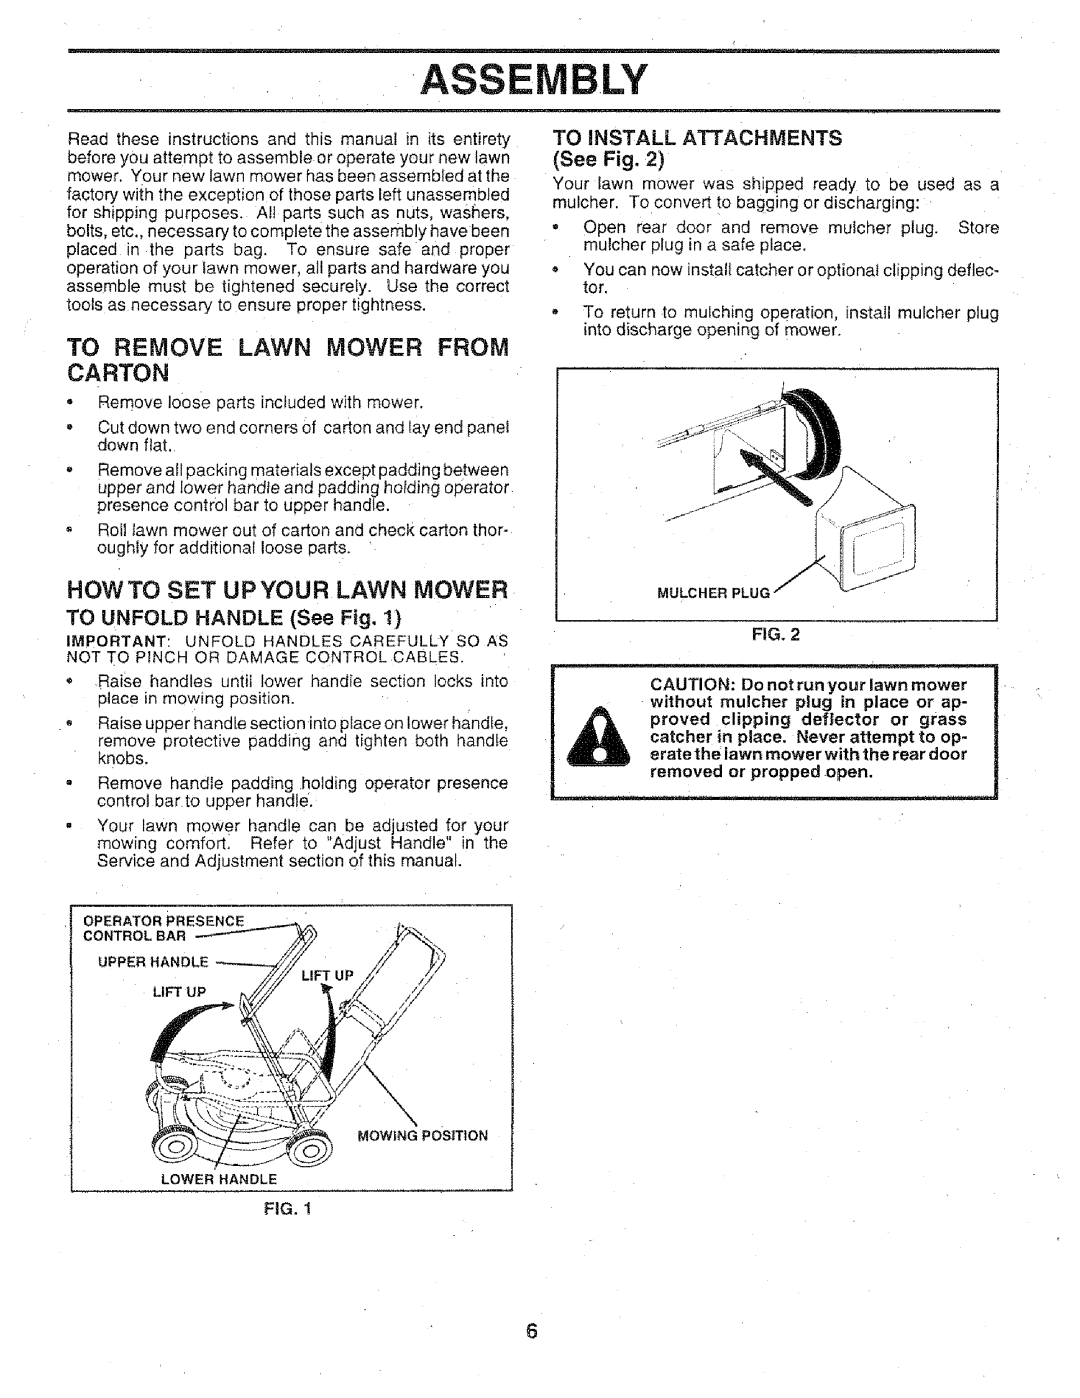 Craftsman 917.3773 manual Mbly, To Remove Lawn Mower From, Carton, Howto Set Upyour Lawn Mower, TO UNFOLD HANDLE See Fig 